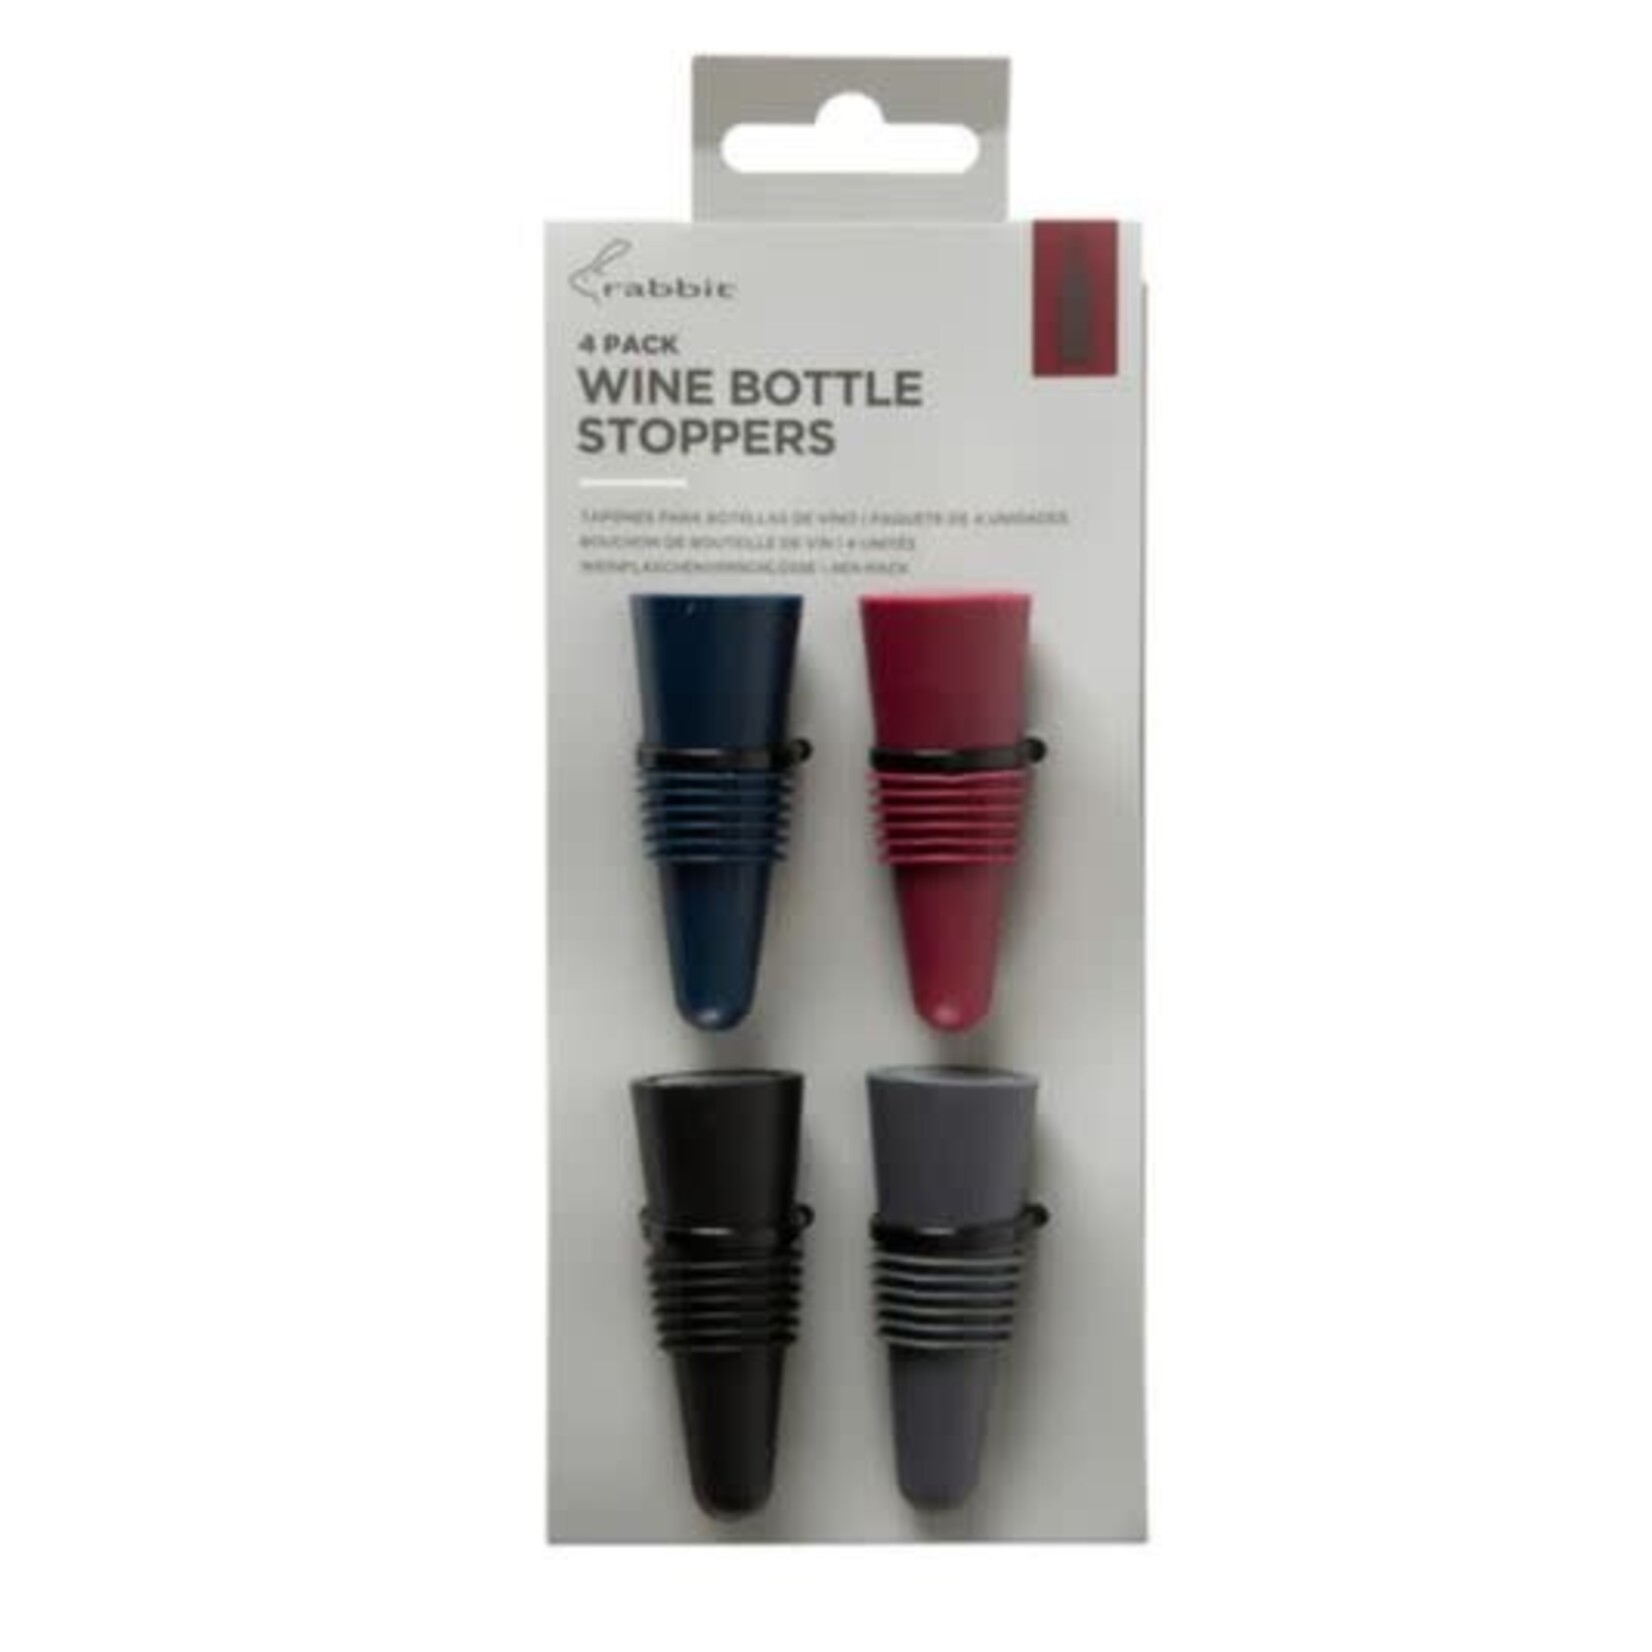 Rabbit Rabbit Wine Bottle Stoppers 4 Pack Assorted Colors